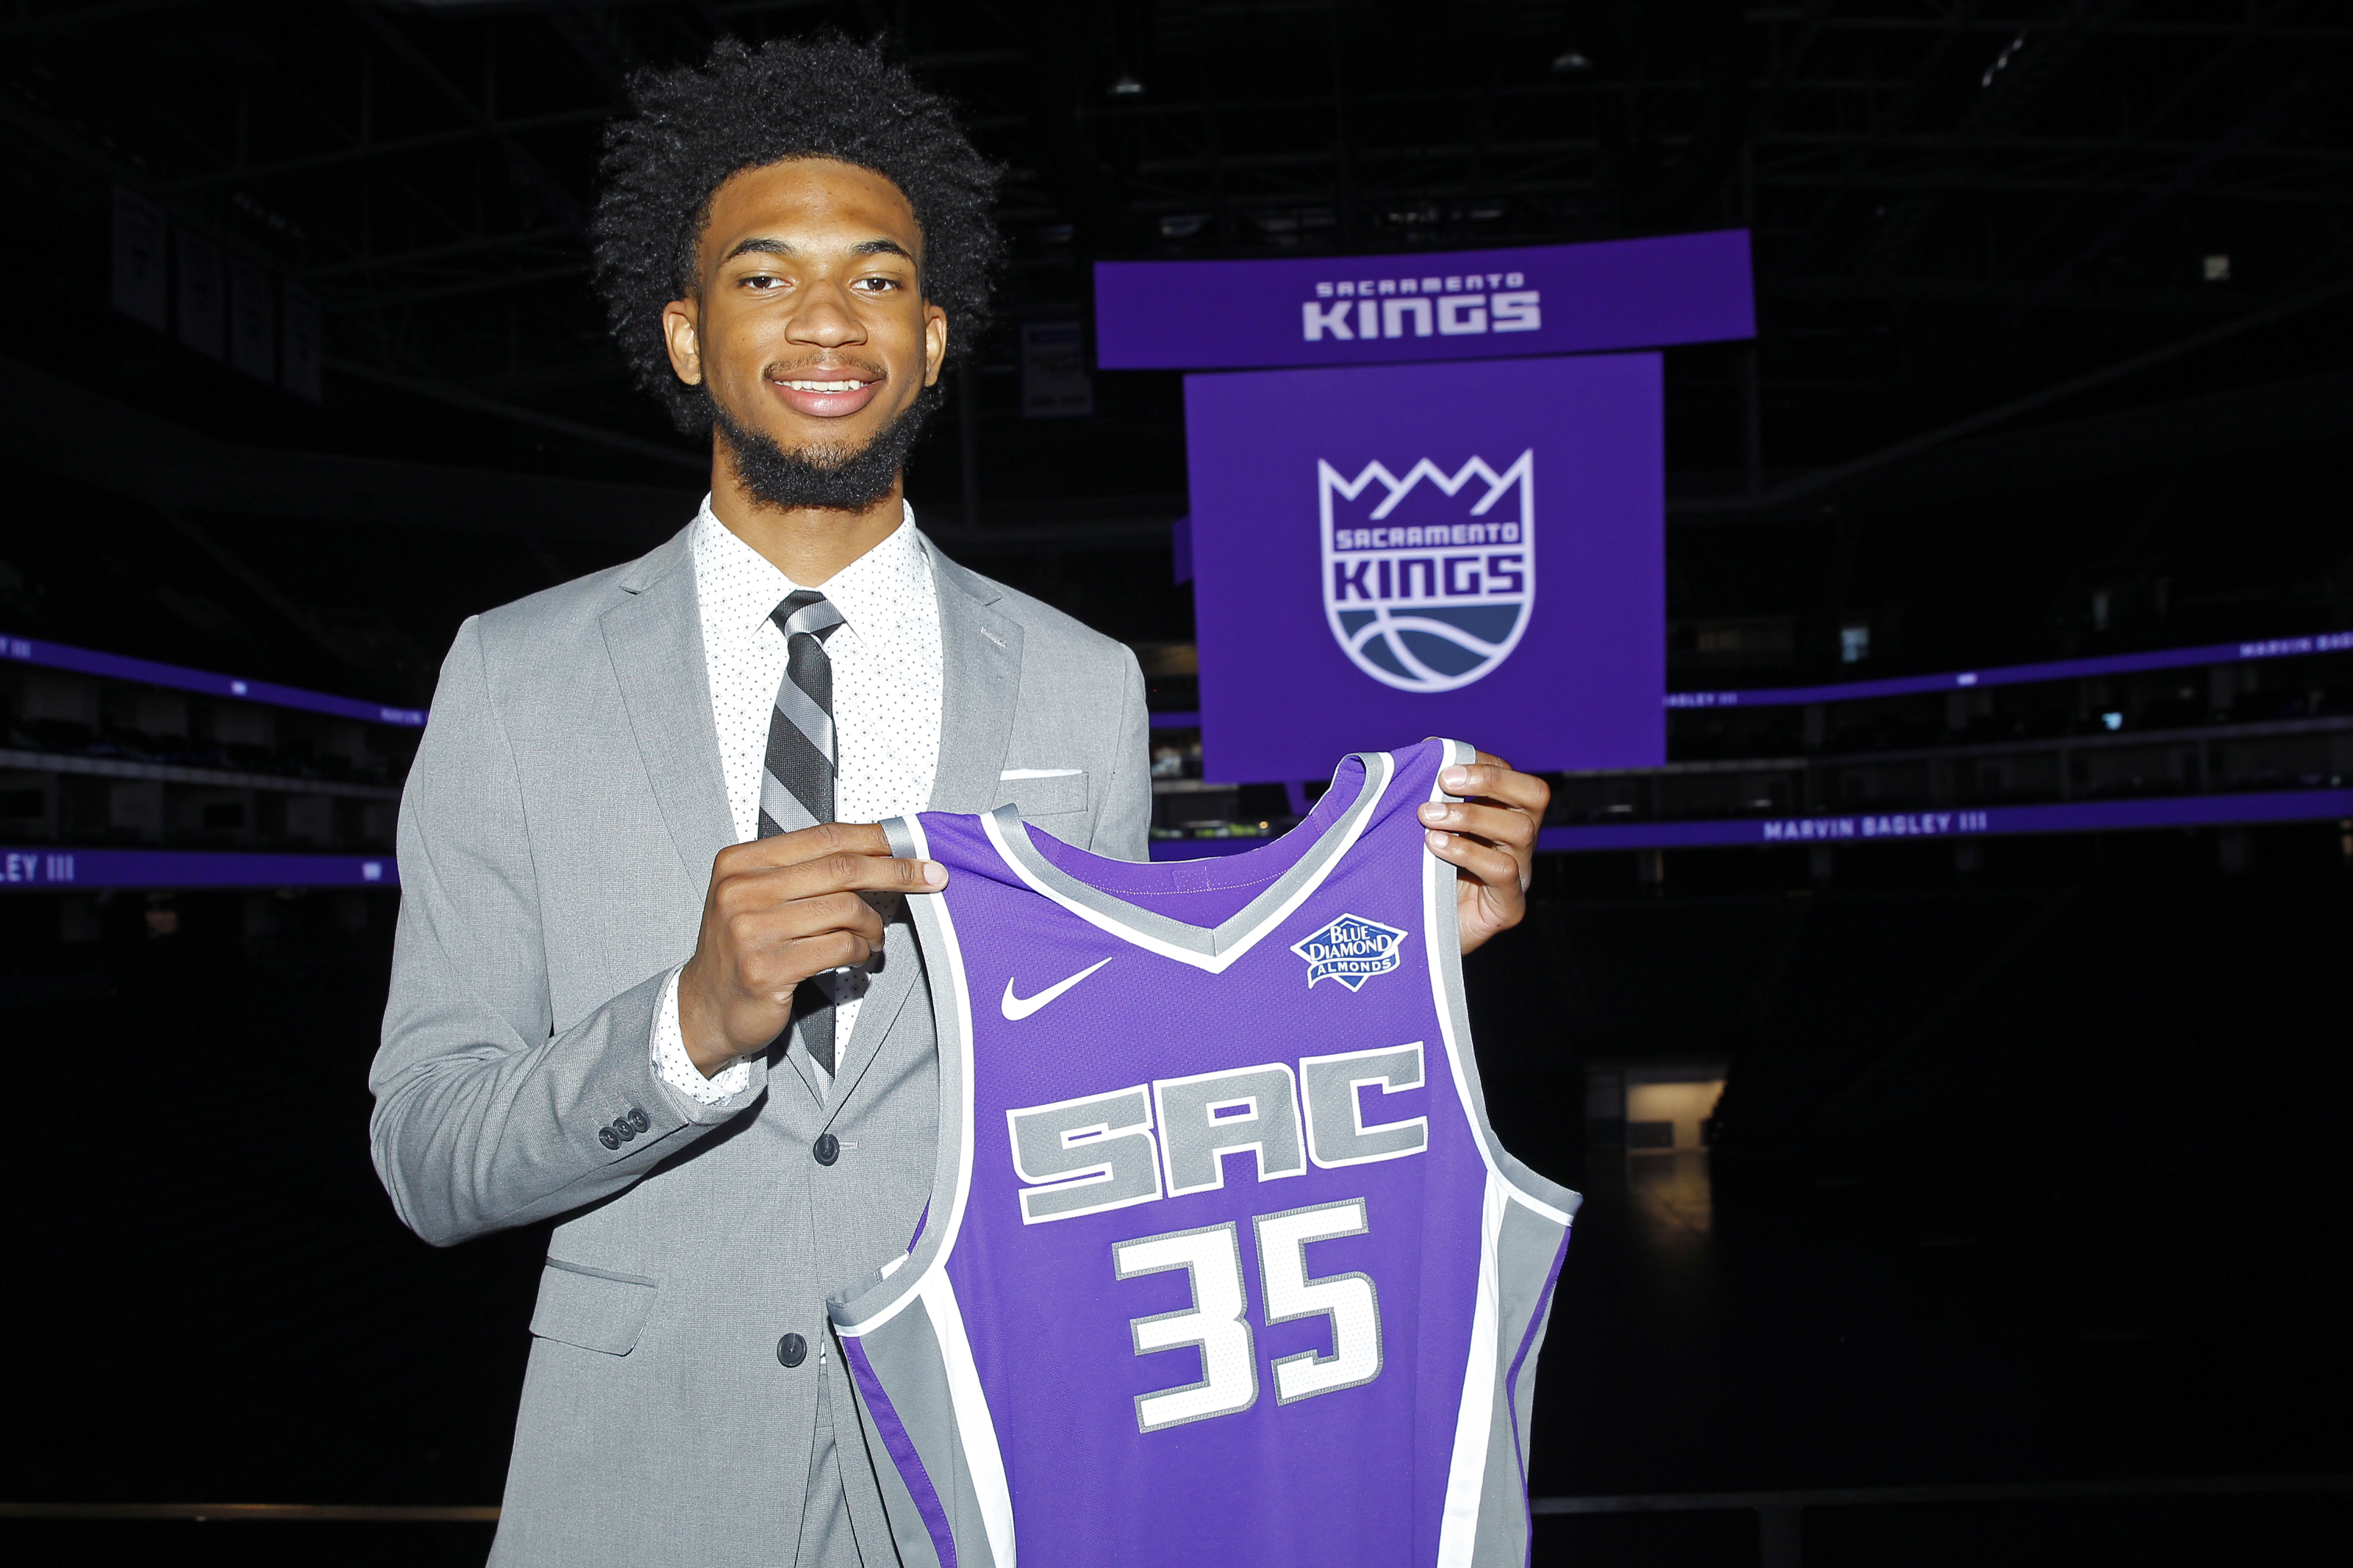 The Sacramento Kings Drafted Marvin Bagley Not Luka Doncic. Period